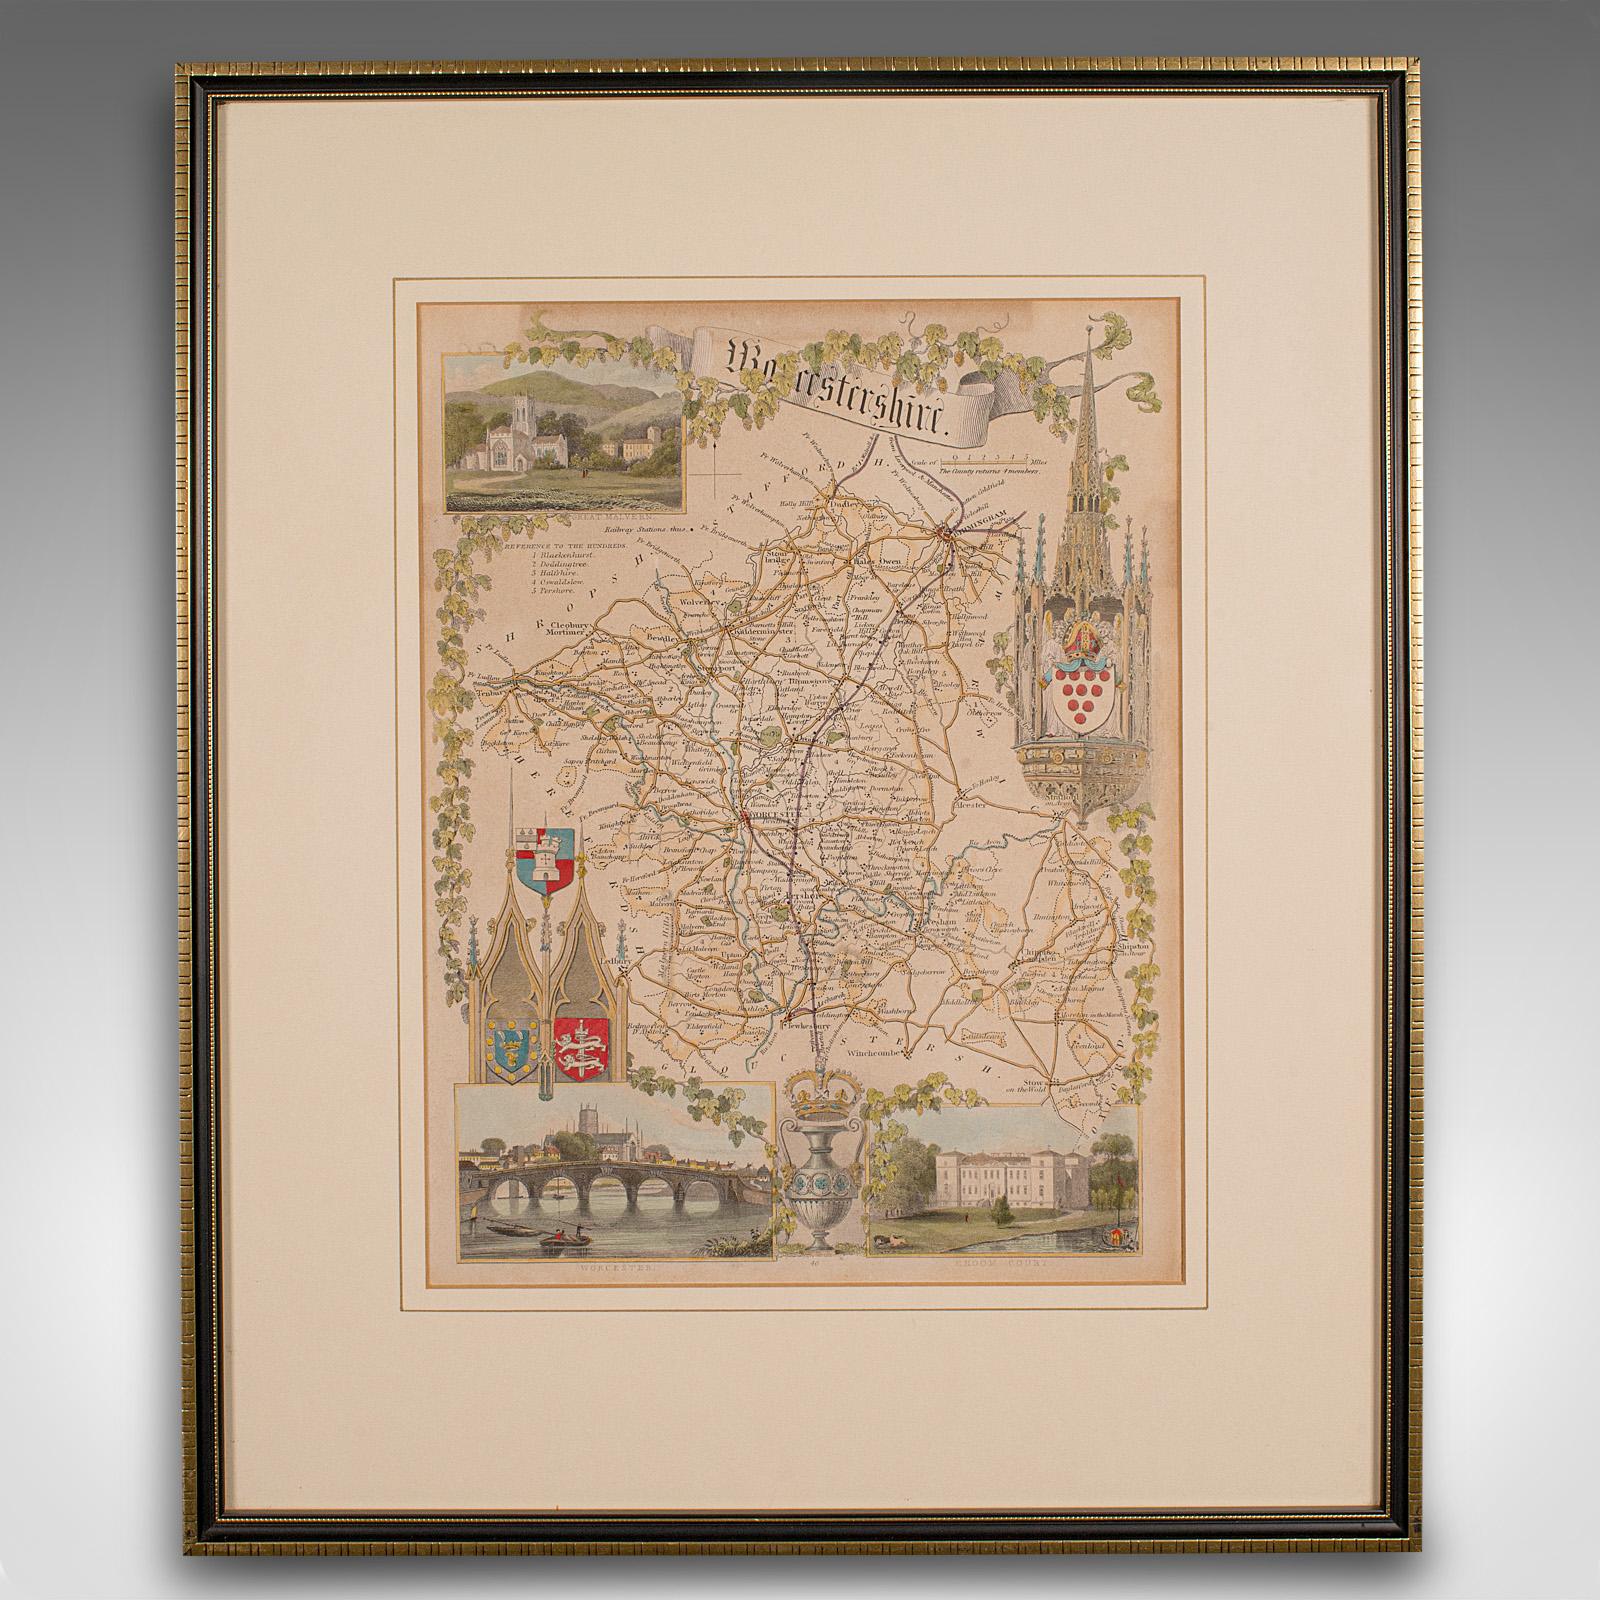 
This is an antique lithography map of Worcestershire. An English, framed atlas engraving of cartographic interest, dating to the early 19th century and later.

Superb lithography of Worcestershire and its county detail, perfect for